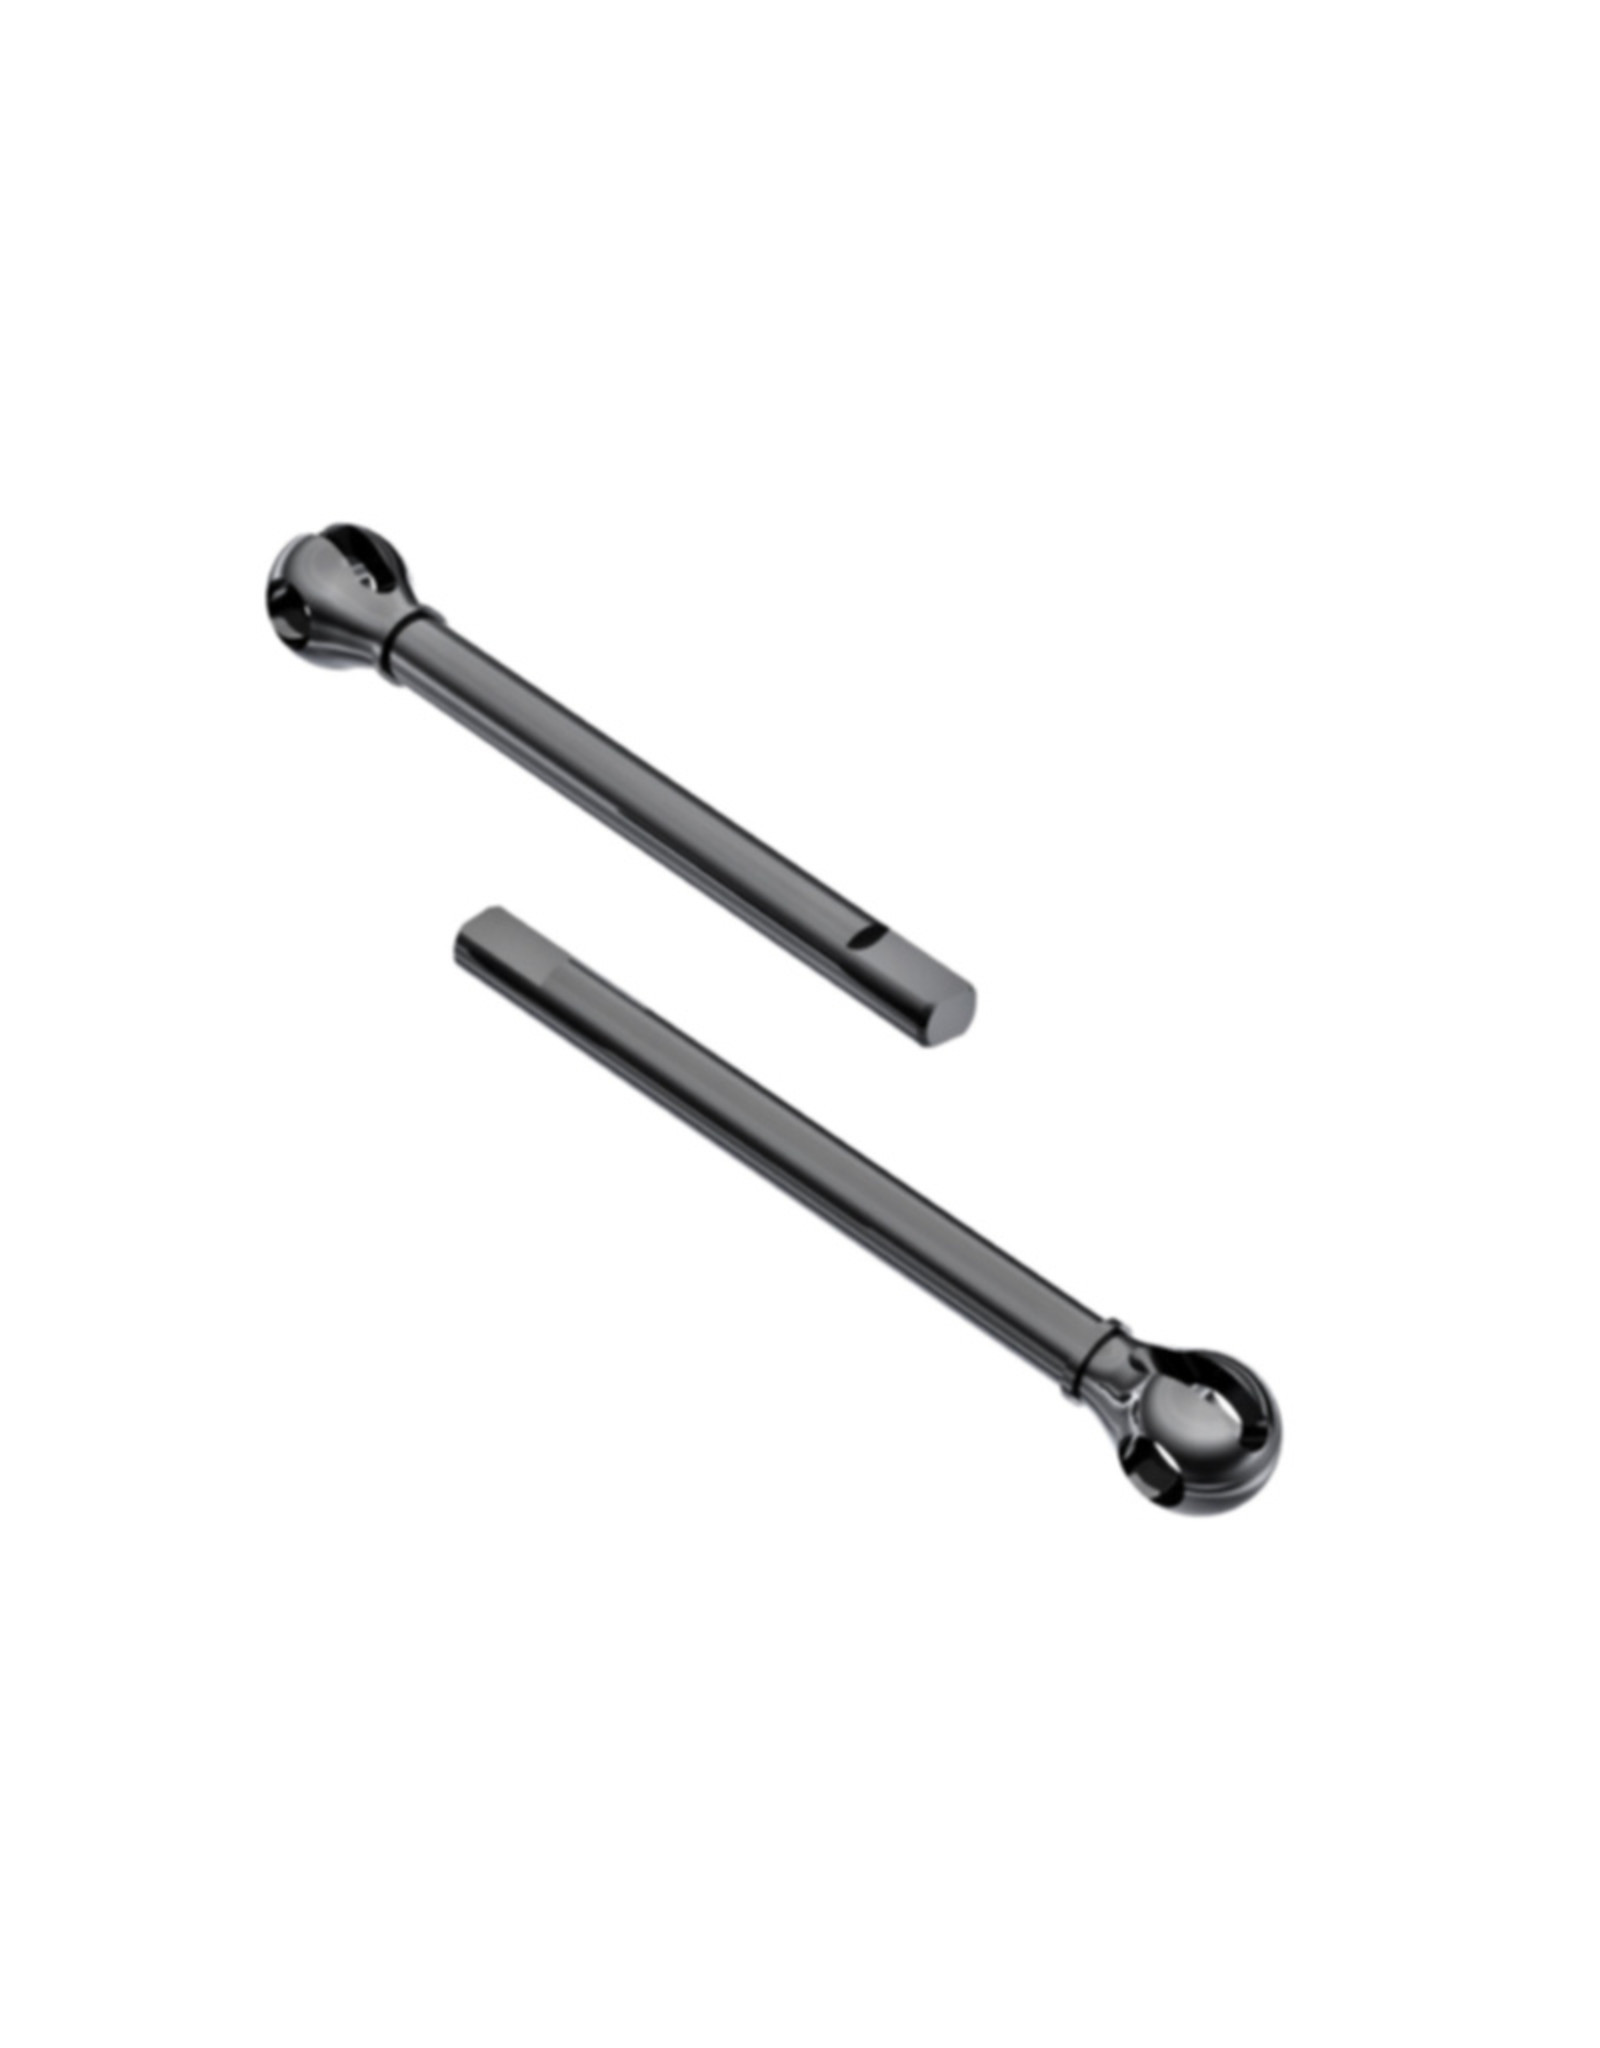 Traxxas TRA9729 AXLE SHAFTS, FRONT, OUTER